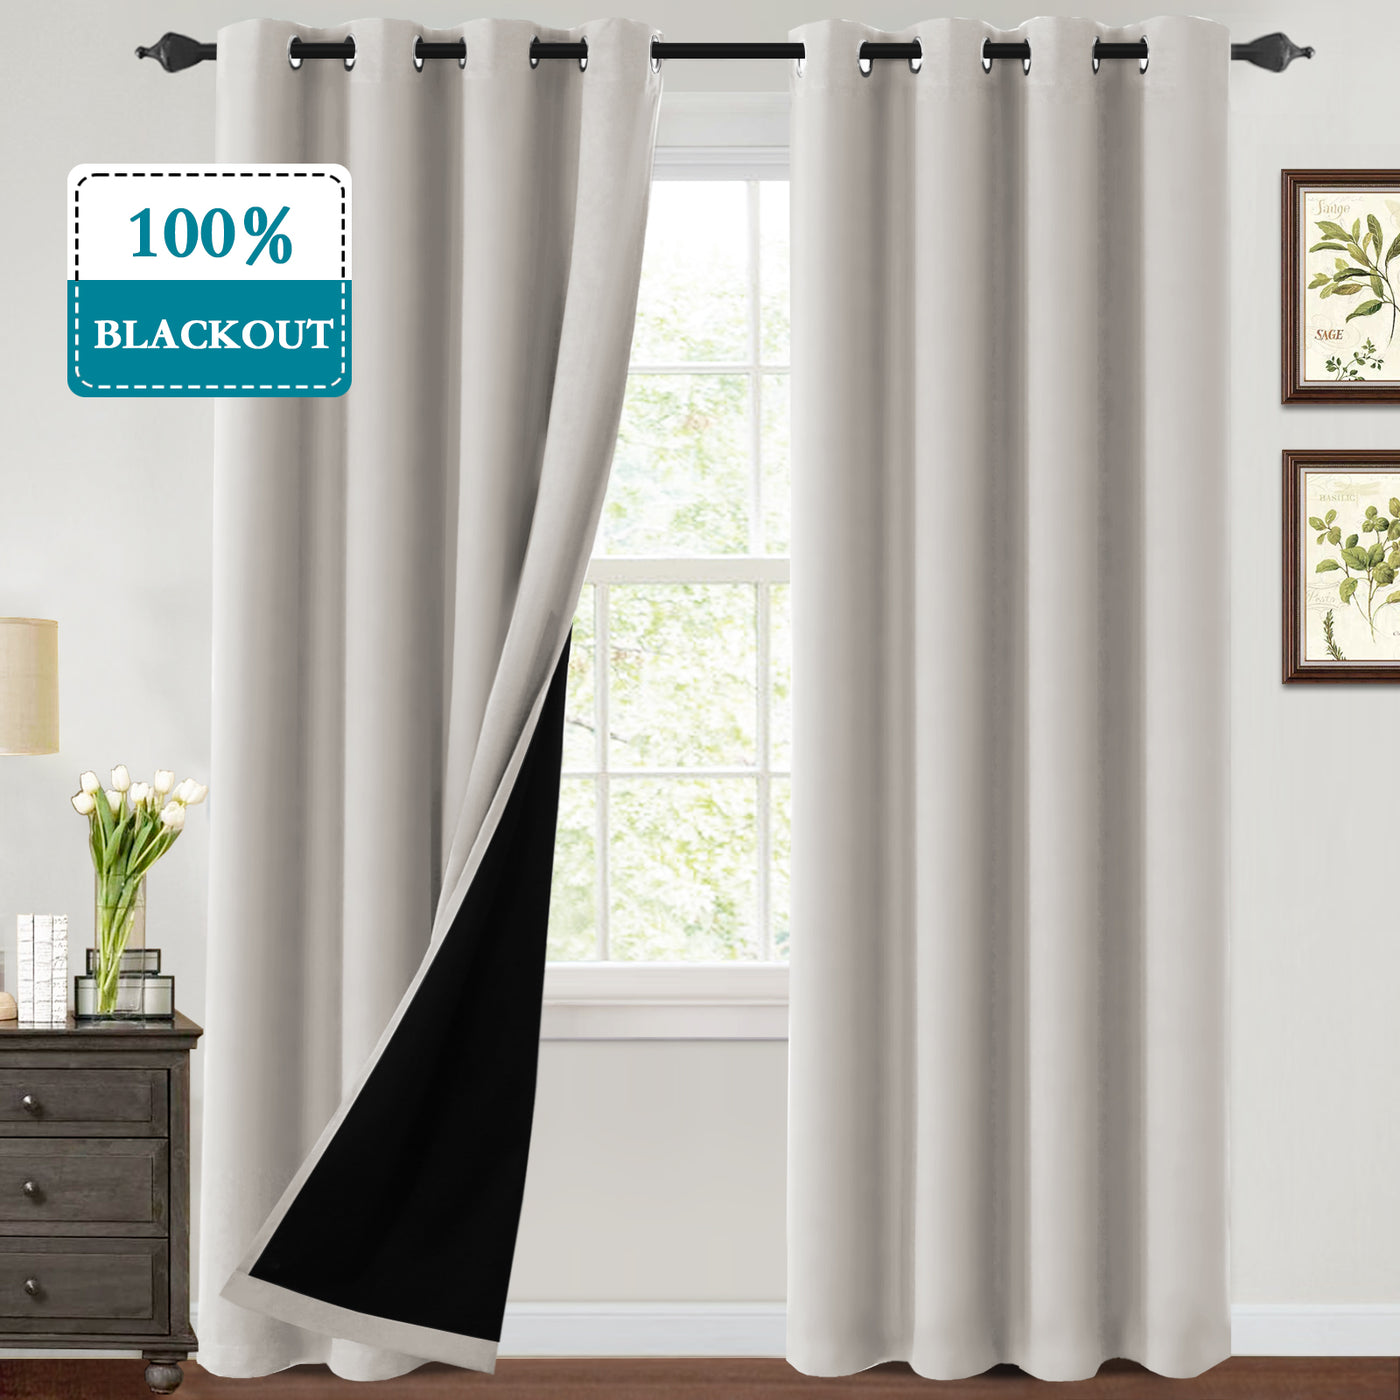 Thermal Insulated 100% Blackout Grommet Curtains for Bedroom with Black Liner(52 x 84-Inch, 2 Panels)